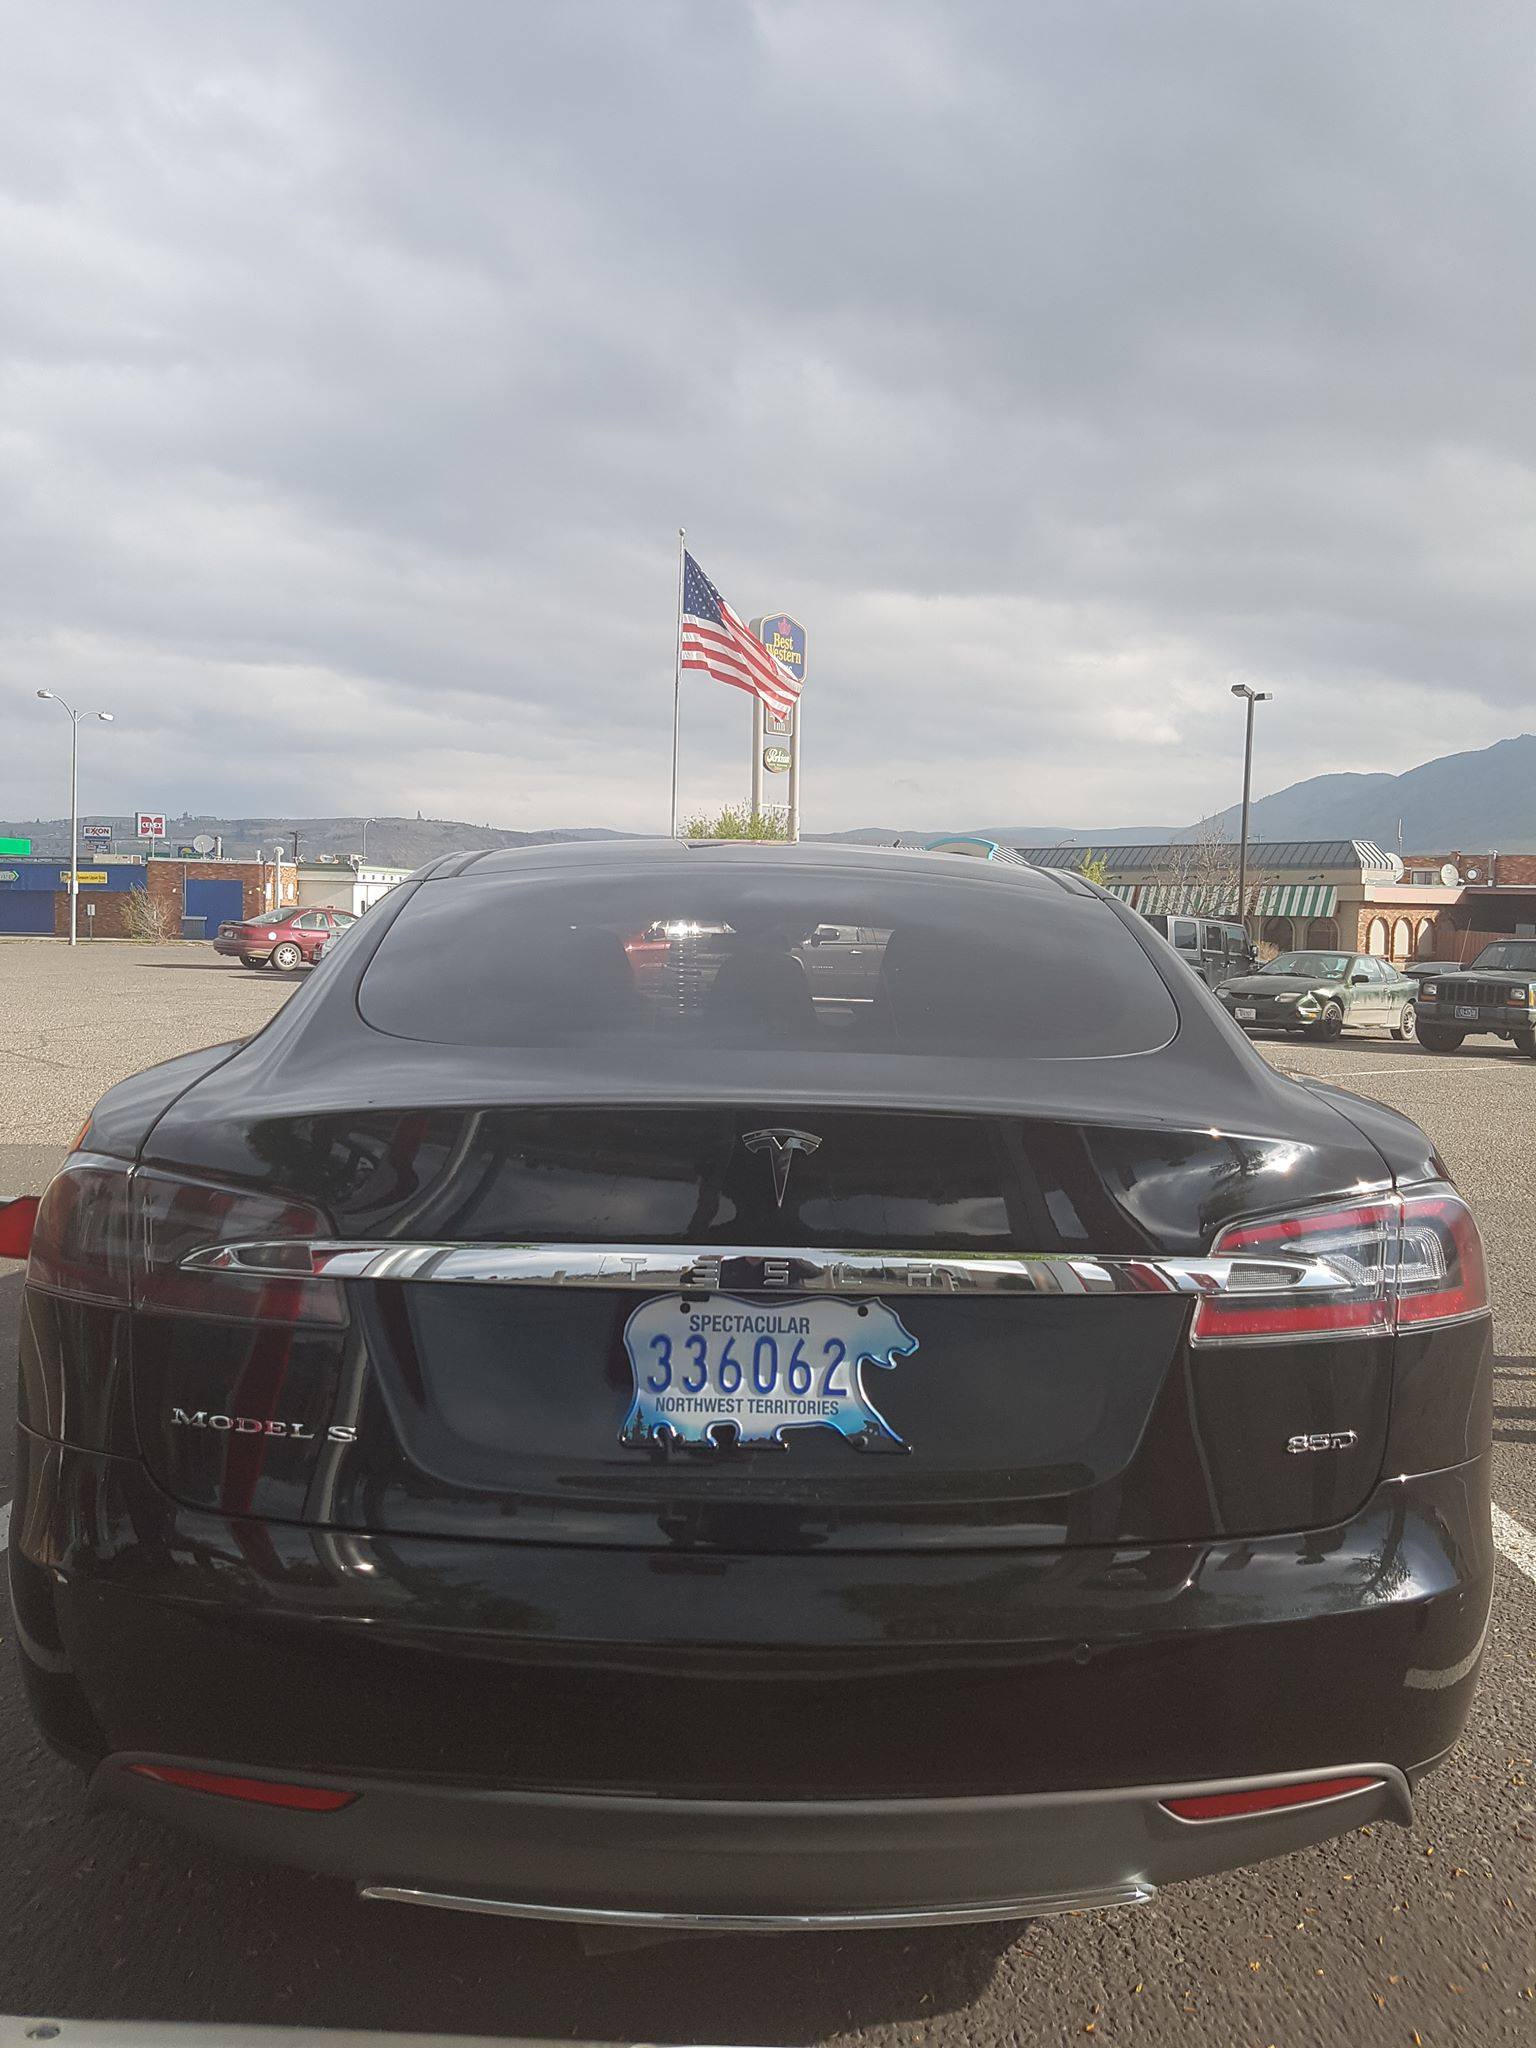 Locke family's Model S with NWT license plate